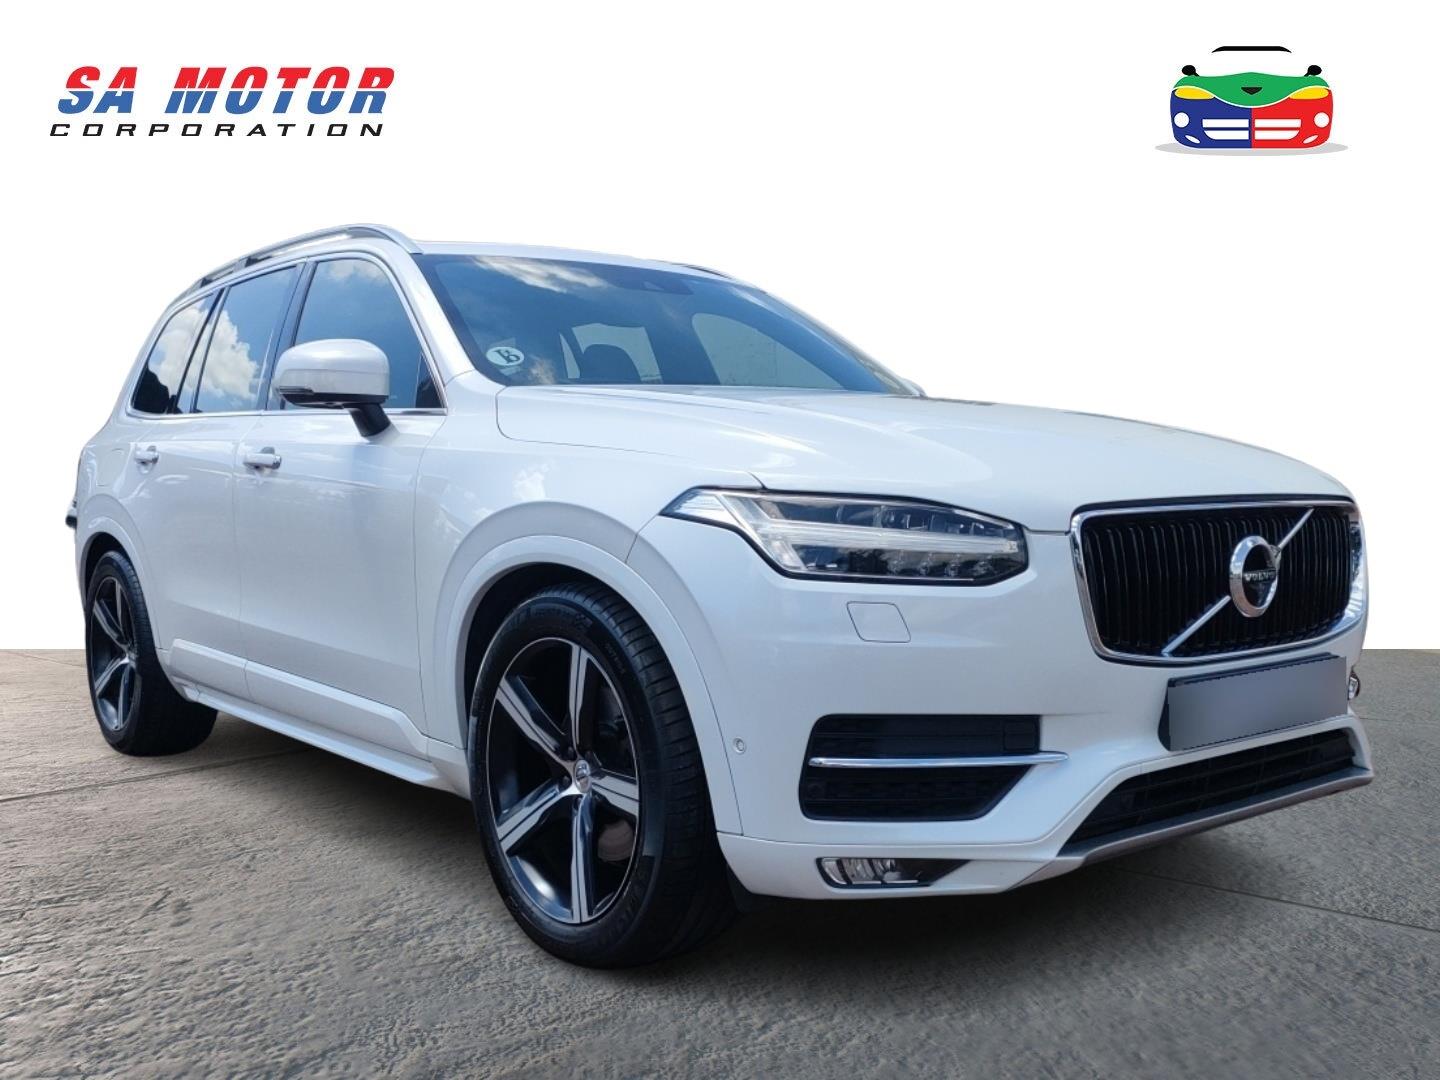 2016 Volvo Xc90 D5 2.0 Inscription Awd Geartronic for sale - 325686